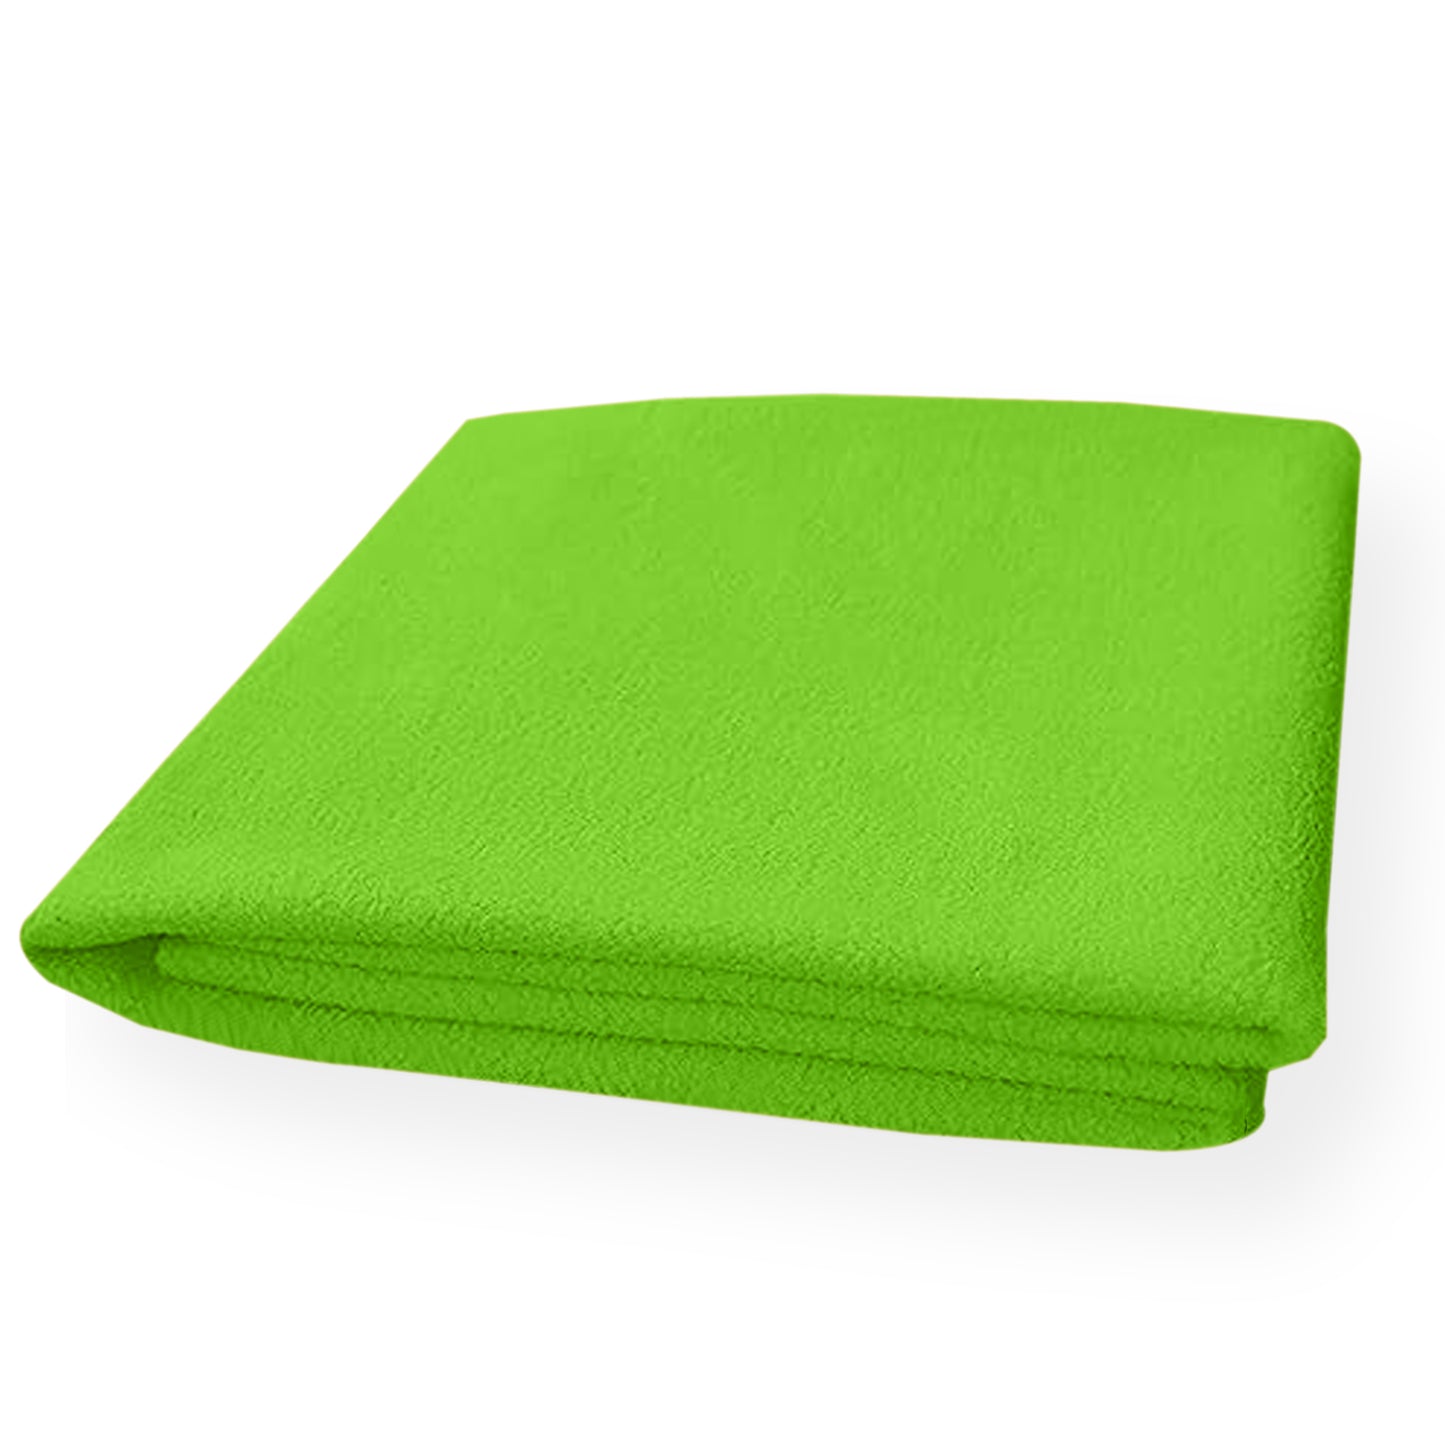 Waterproof Bed Protector,Quick Dry Sheet, Baby Bed Protector (70 X 100 CM), Pack of 1 -PISTA GREEN